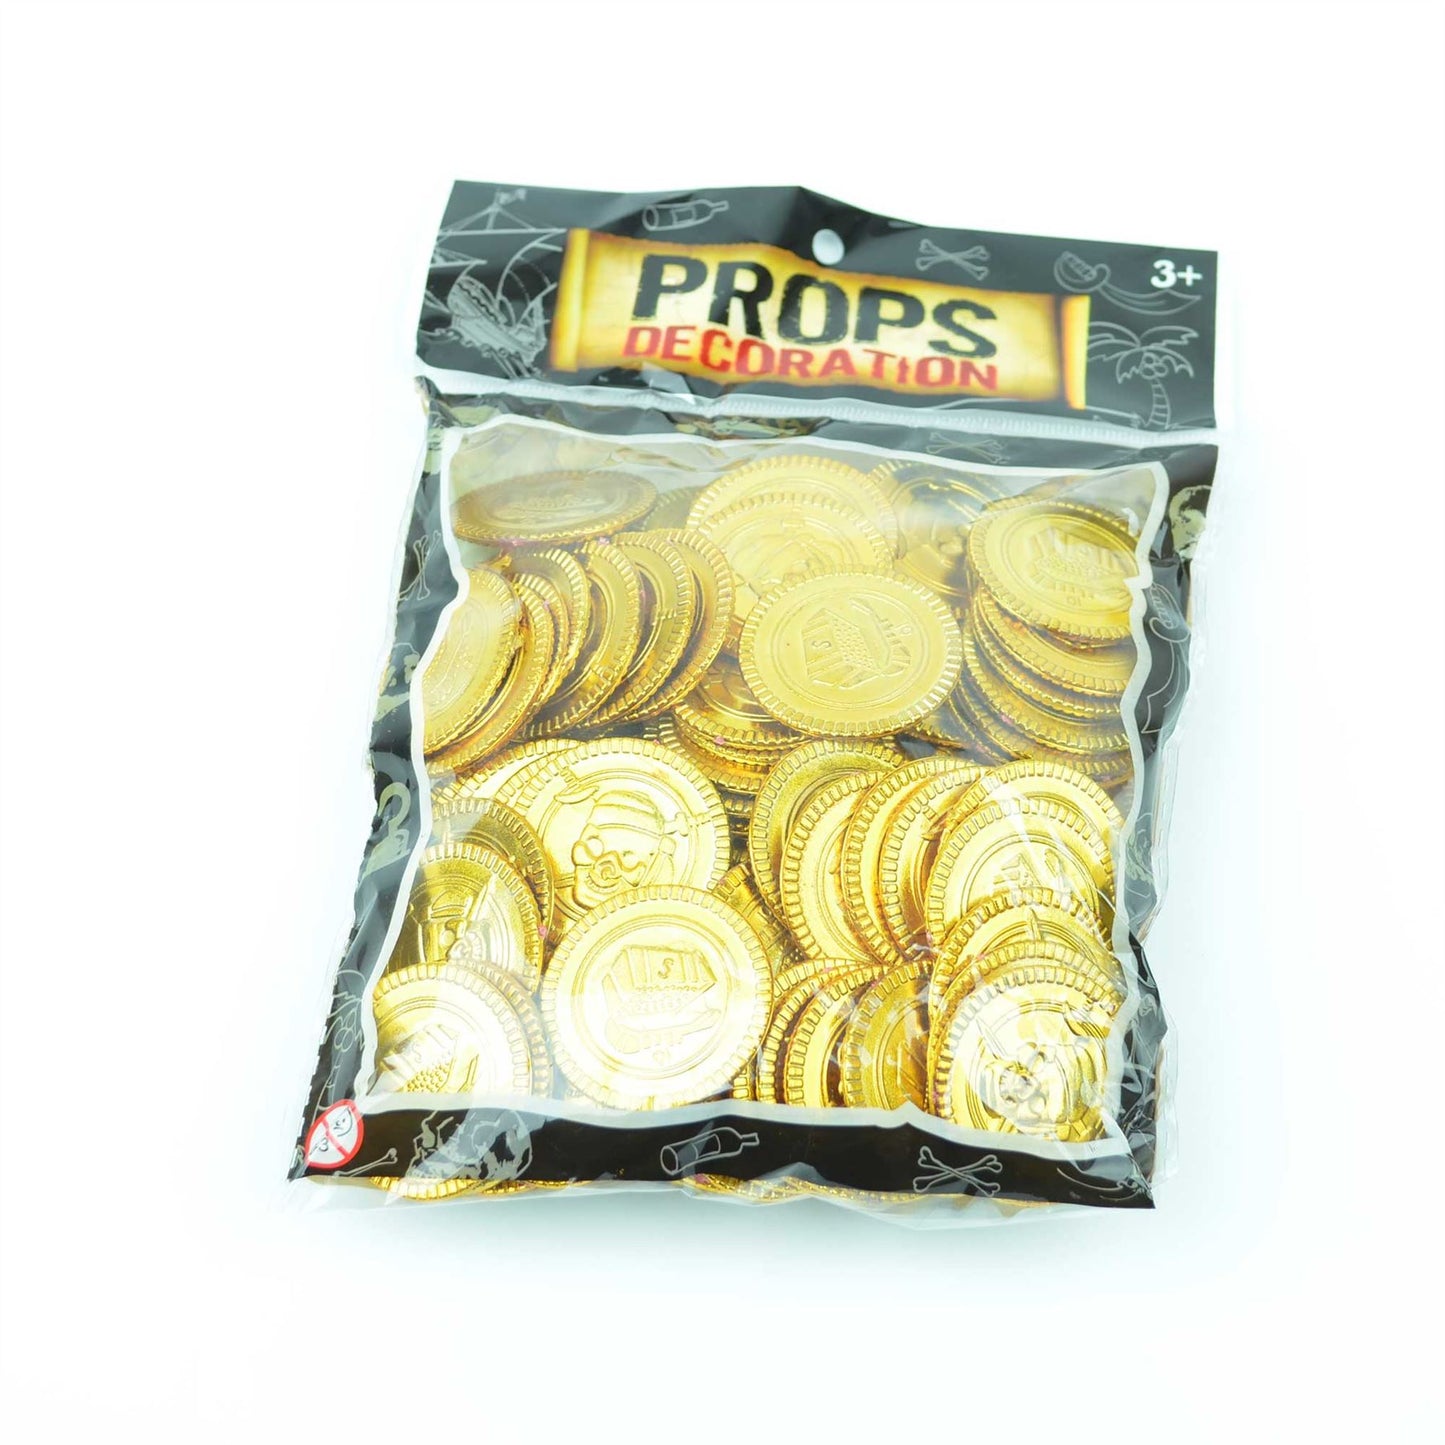 100 x Novelty Gold Coins - Pirate Party Jewelry Fancy Dress Treasure Prop Favor Toy